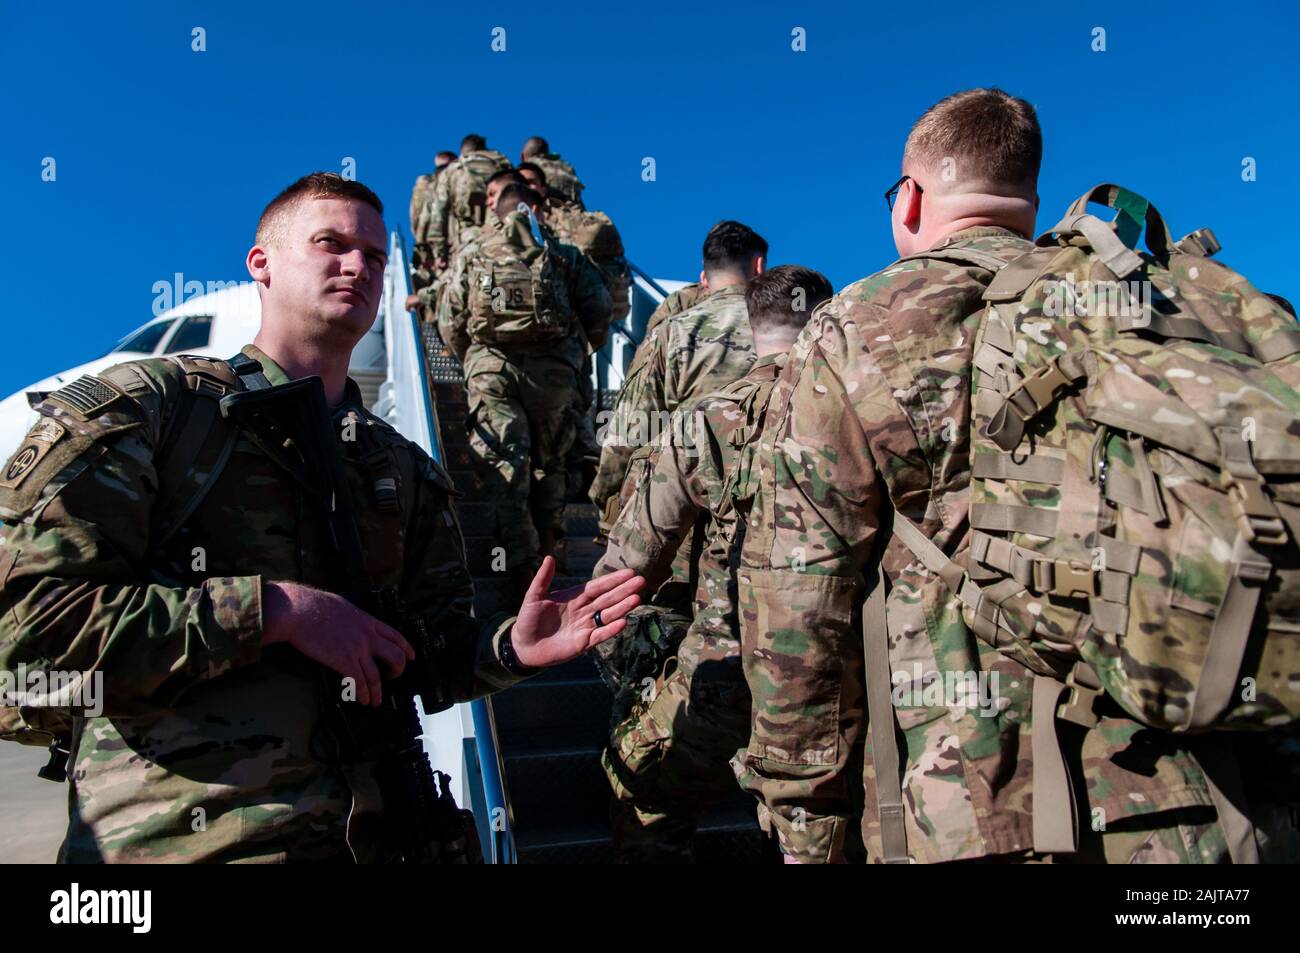 January 5, 2020, Pope Army Airfield, North Carolina, USA: U.S. Army paratroopers from the 1st Brigade Combat Team, 82nd Airborne Division, board an aircraft at Pope Army Airfield for deployment to the U.S. Central Command area of operations in response to increased threat levels against U.S. personnel and facilities in the area. Today's deployment follows the Jan. 1 deployment of a division infantry battalion; the Jan. 2 U.S. drone strike in Baghdad, Iraq that killed Qasem Soleimani, the head of Iran's Islamic Revolutionary Guard Corps-Quds Force, and elements of the division that deployed Jan Stock Photo